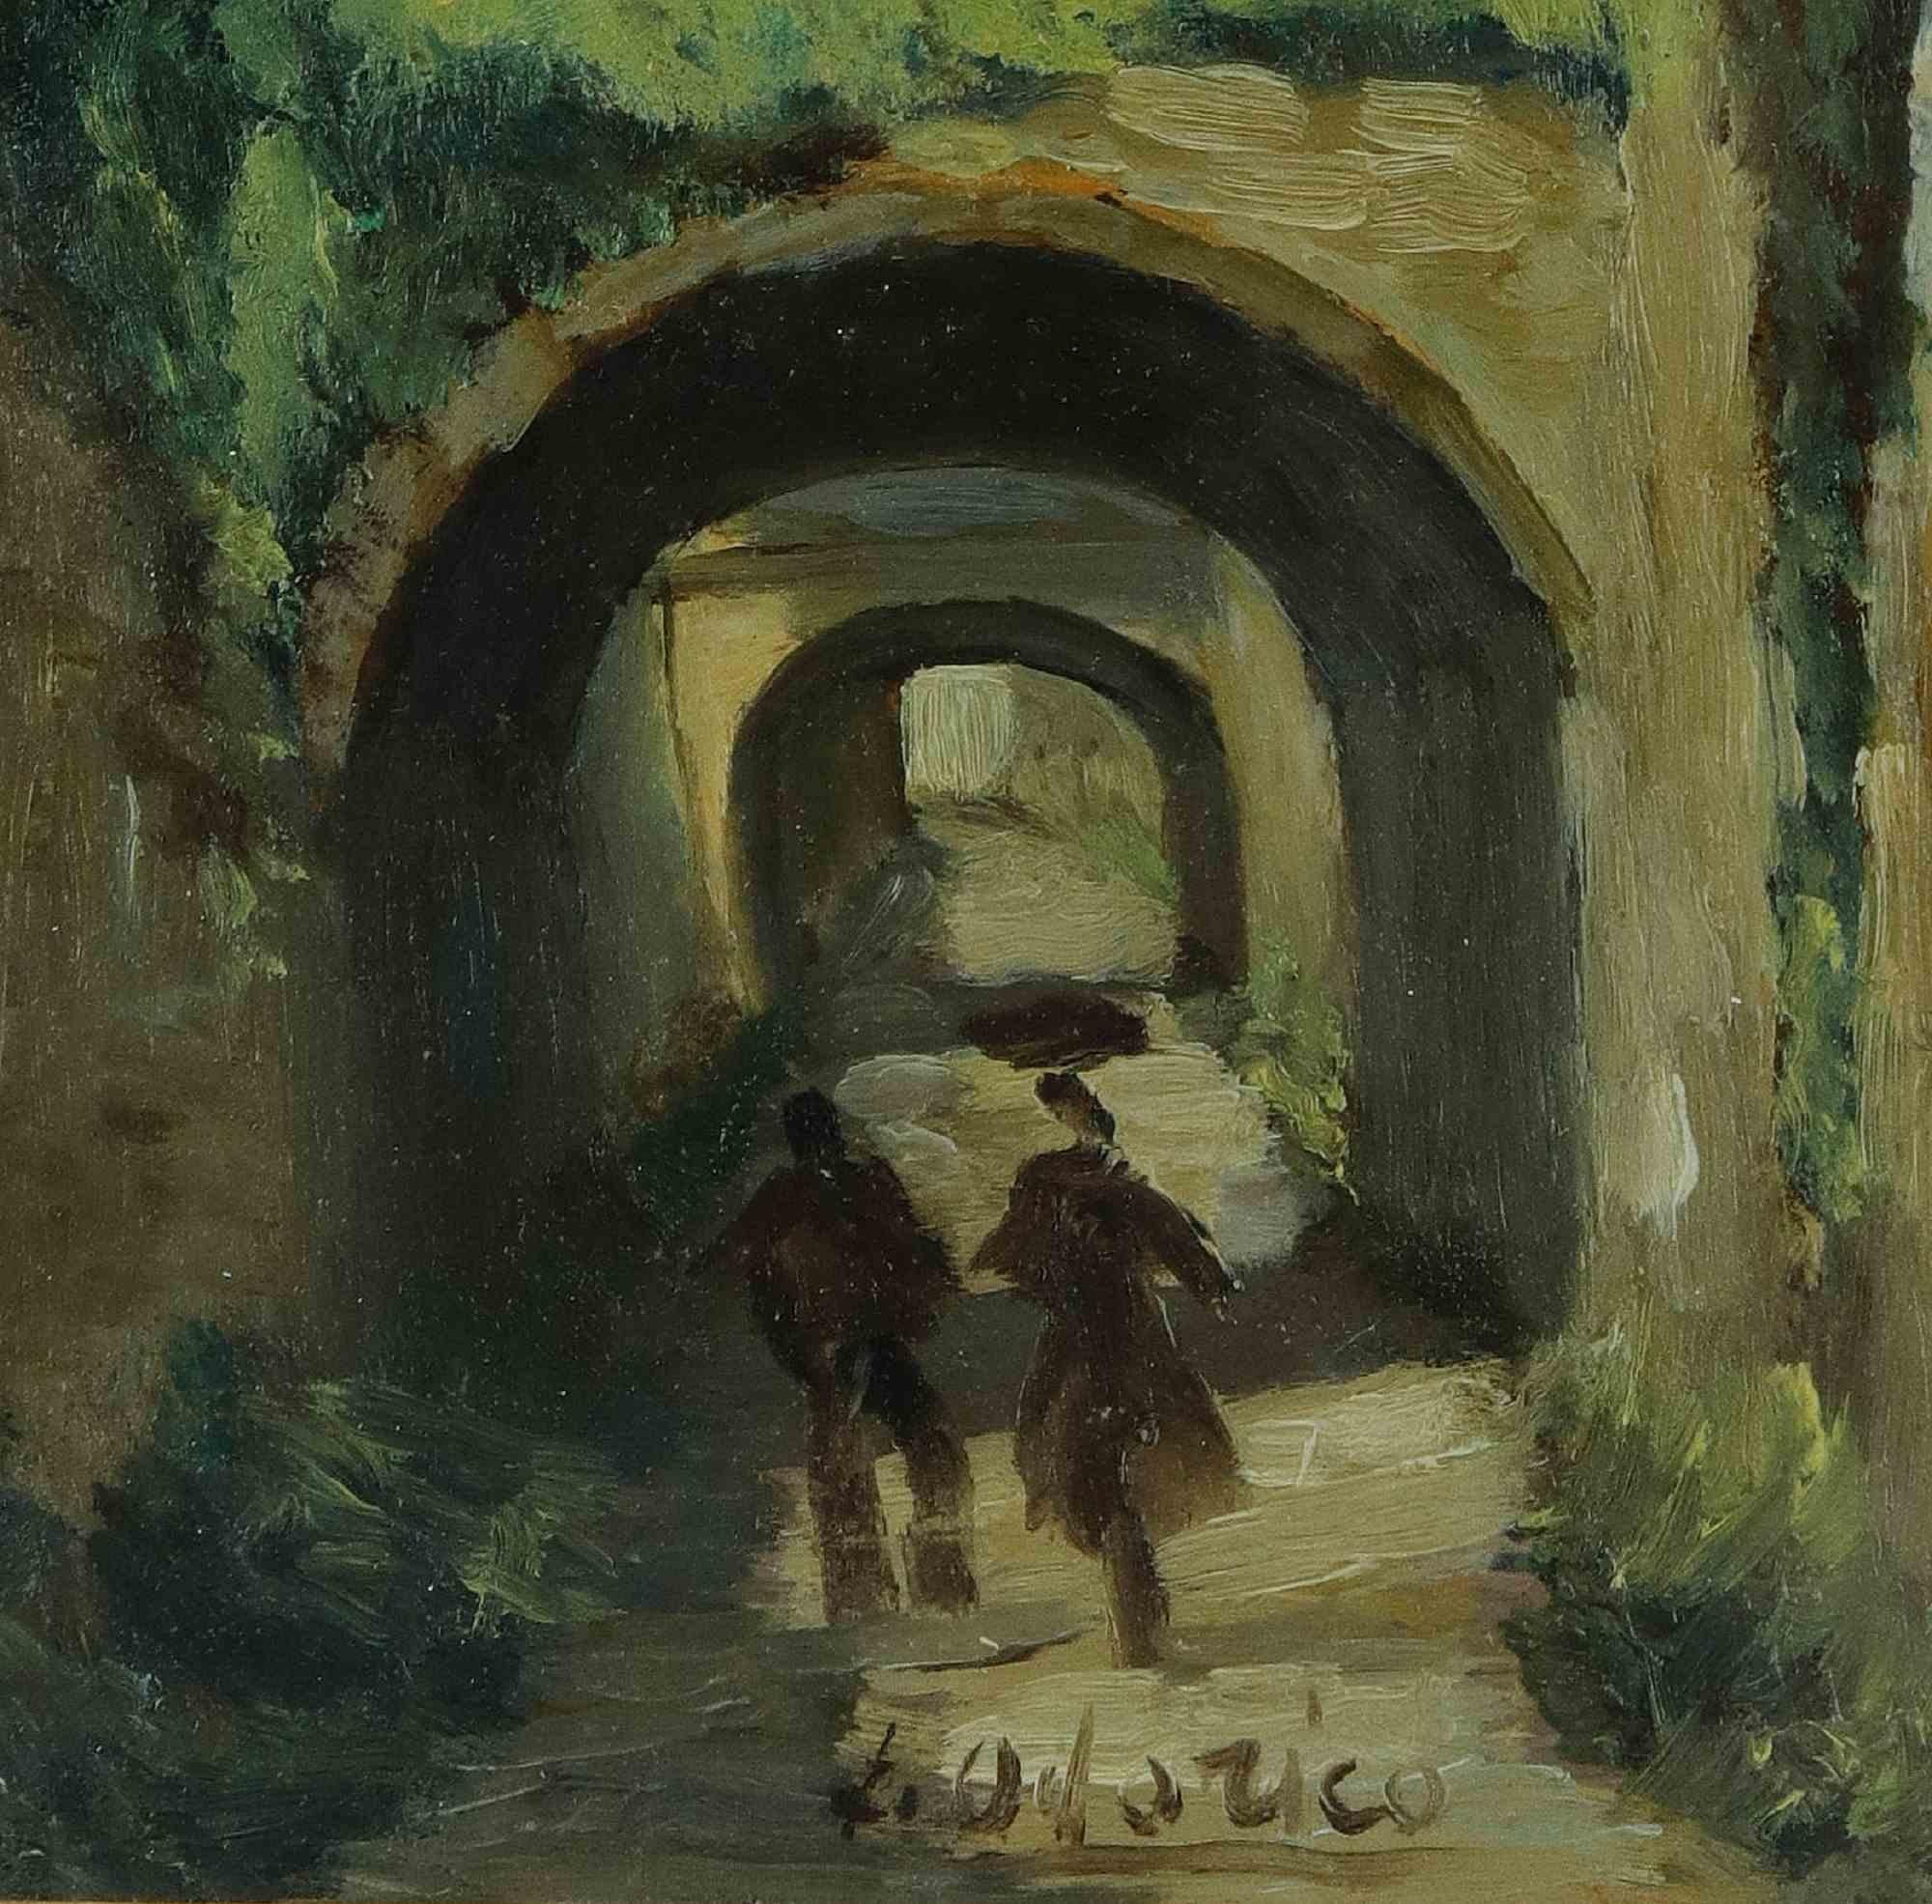 Into the tunnel is an original modern artwork realized by Isidore Odorico (1893-1945) in the early 20th Century.

Oil on board.

Hand signed on the lower margin.

Includes frame